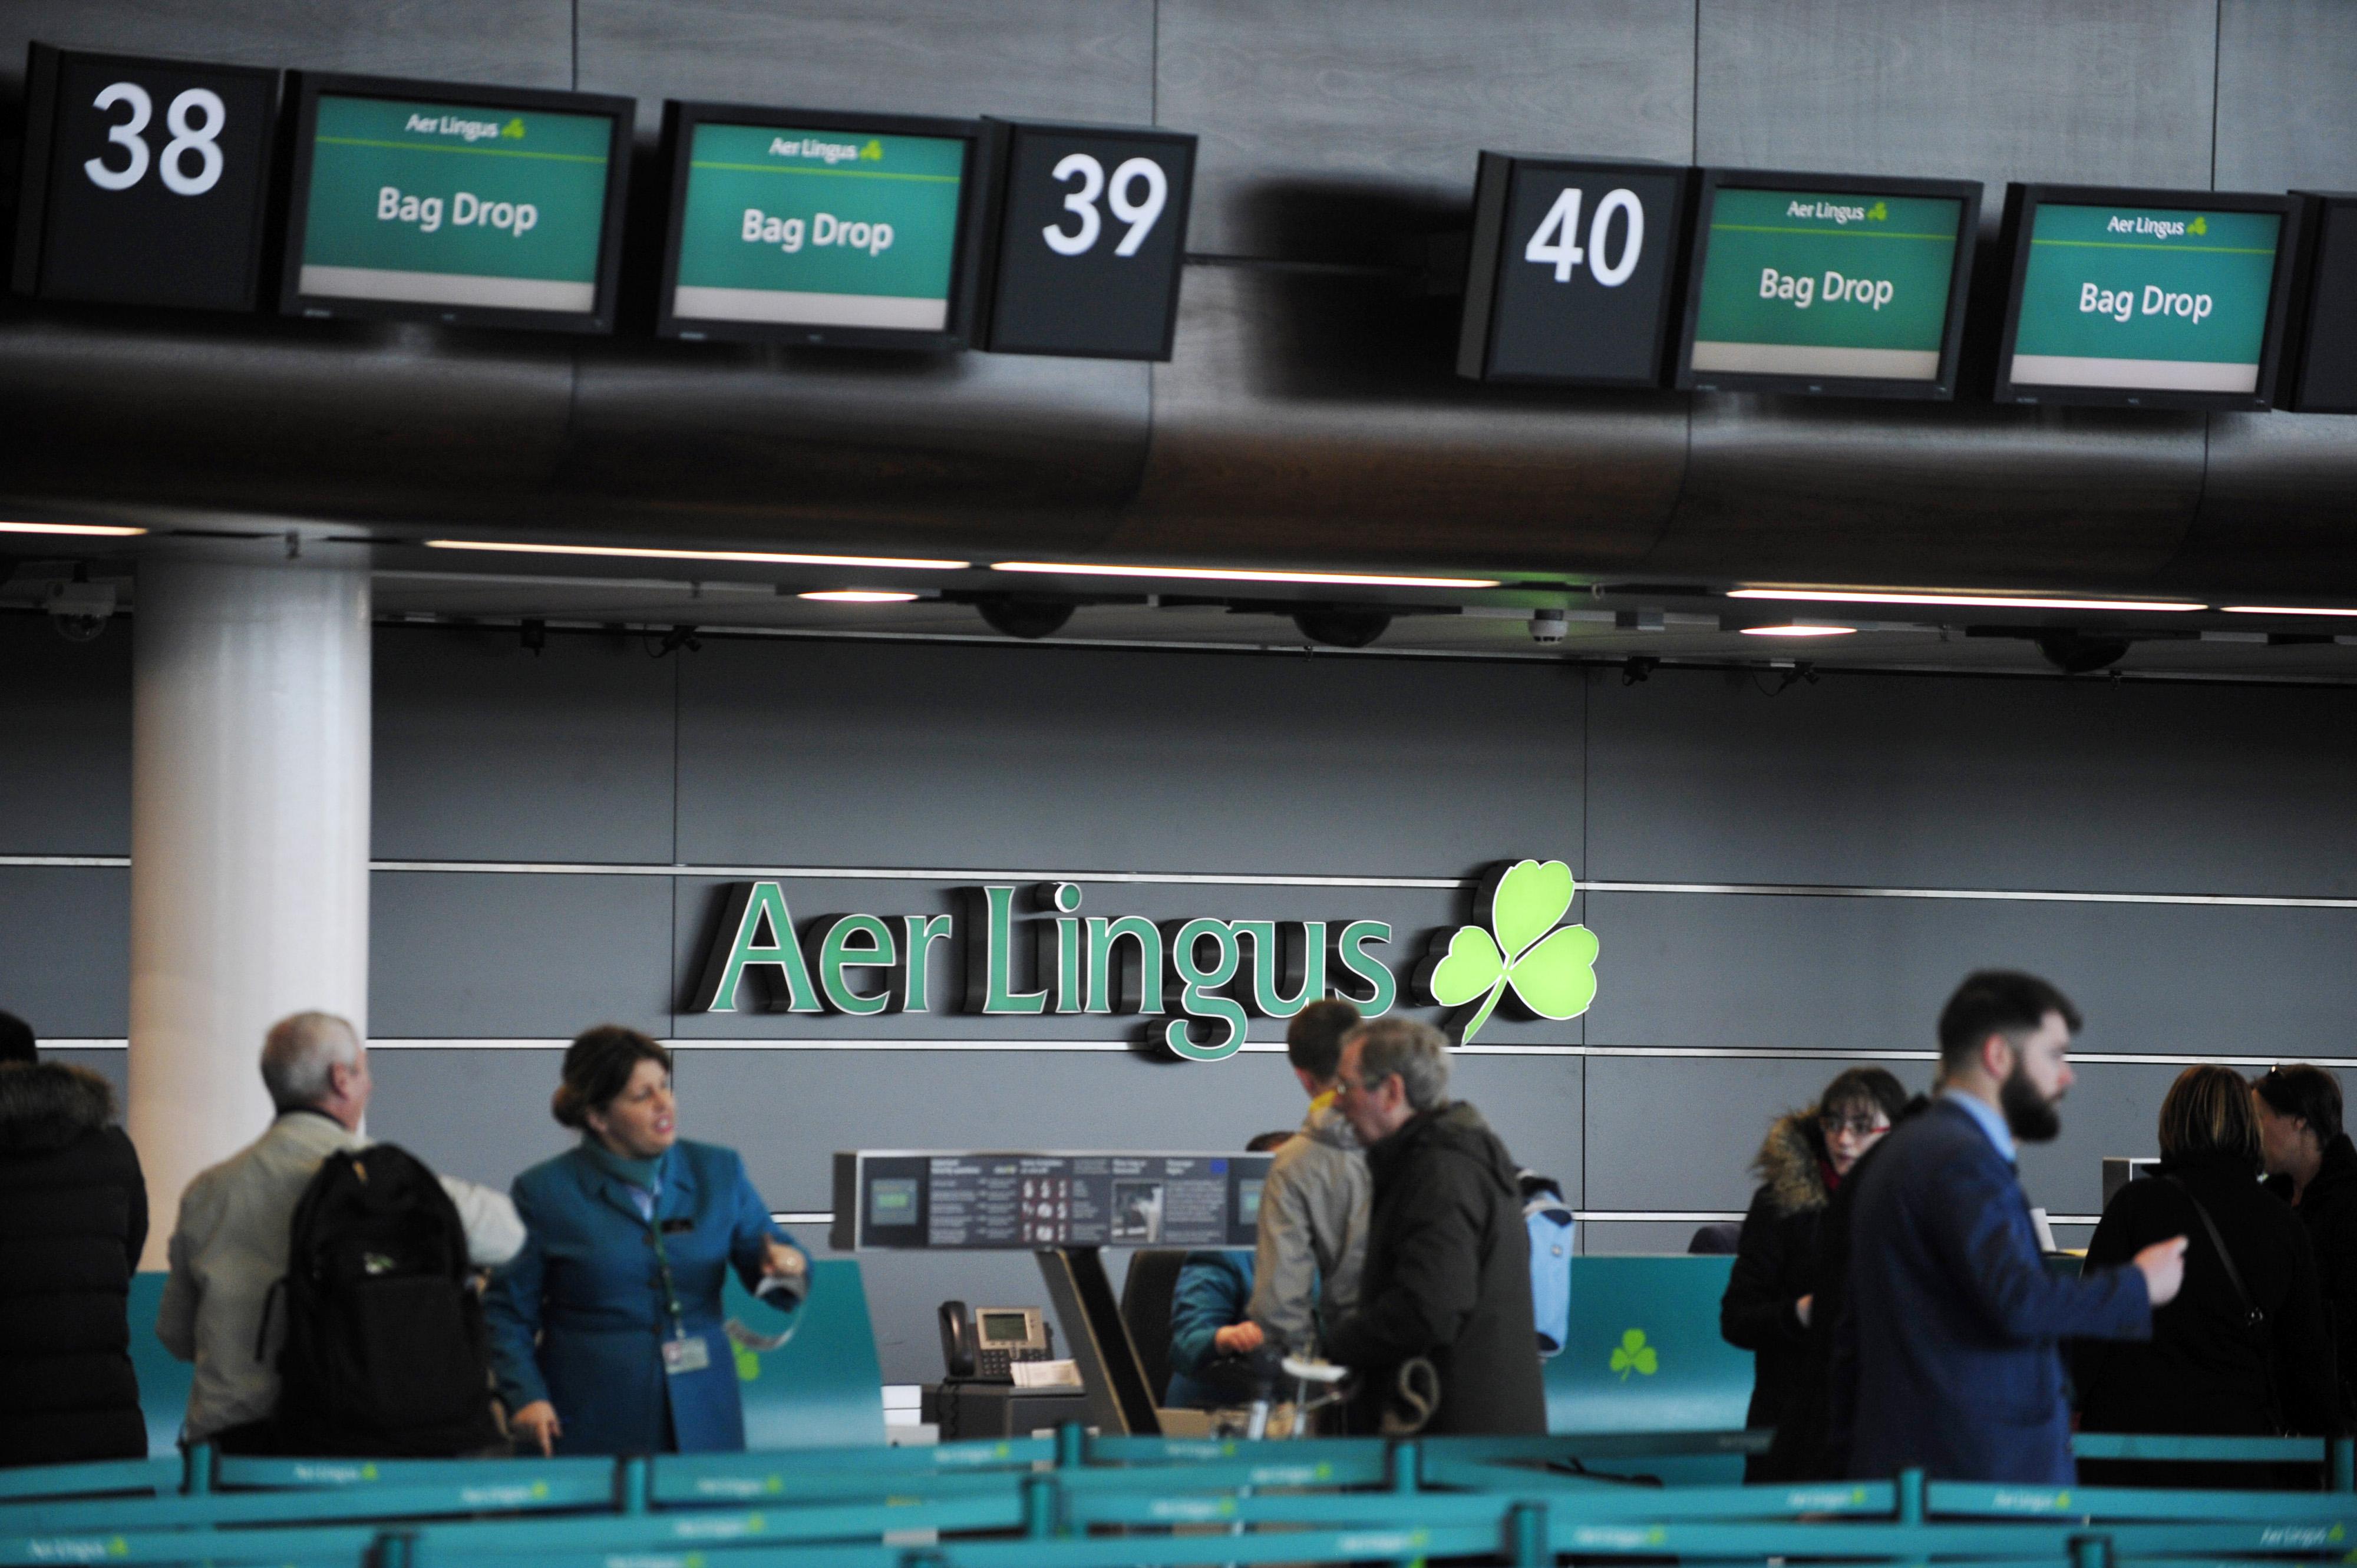 Aer Lingus Aircraft And Check-In Desks At Dublin Airport